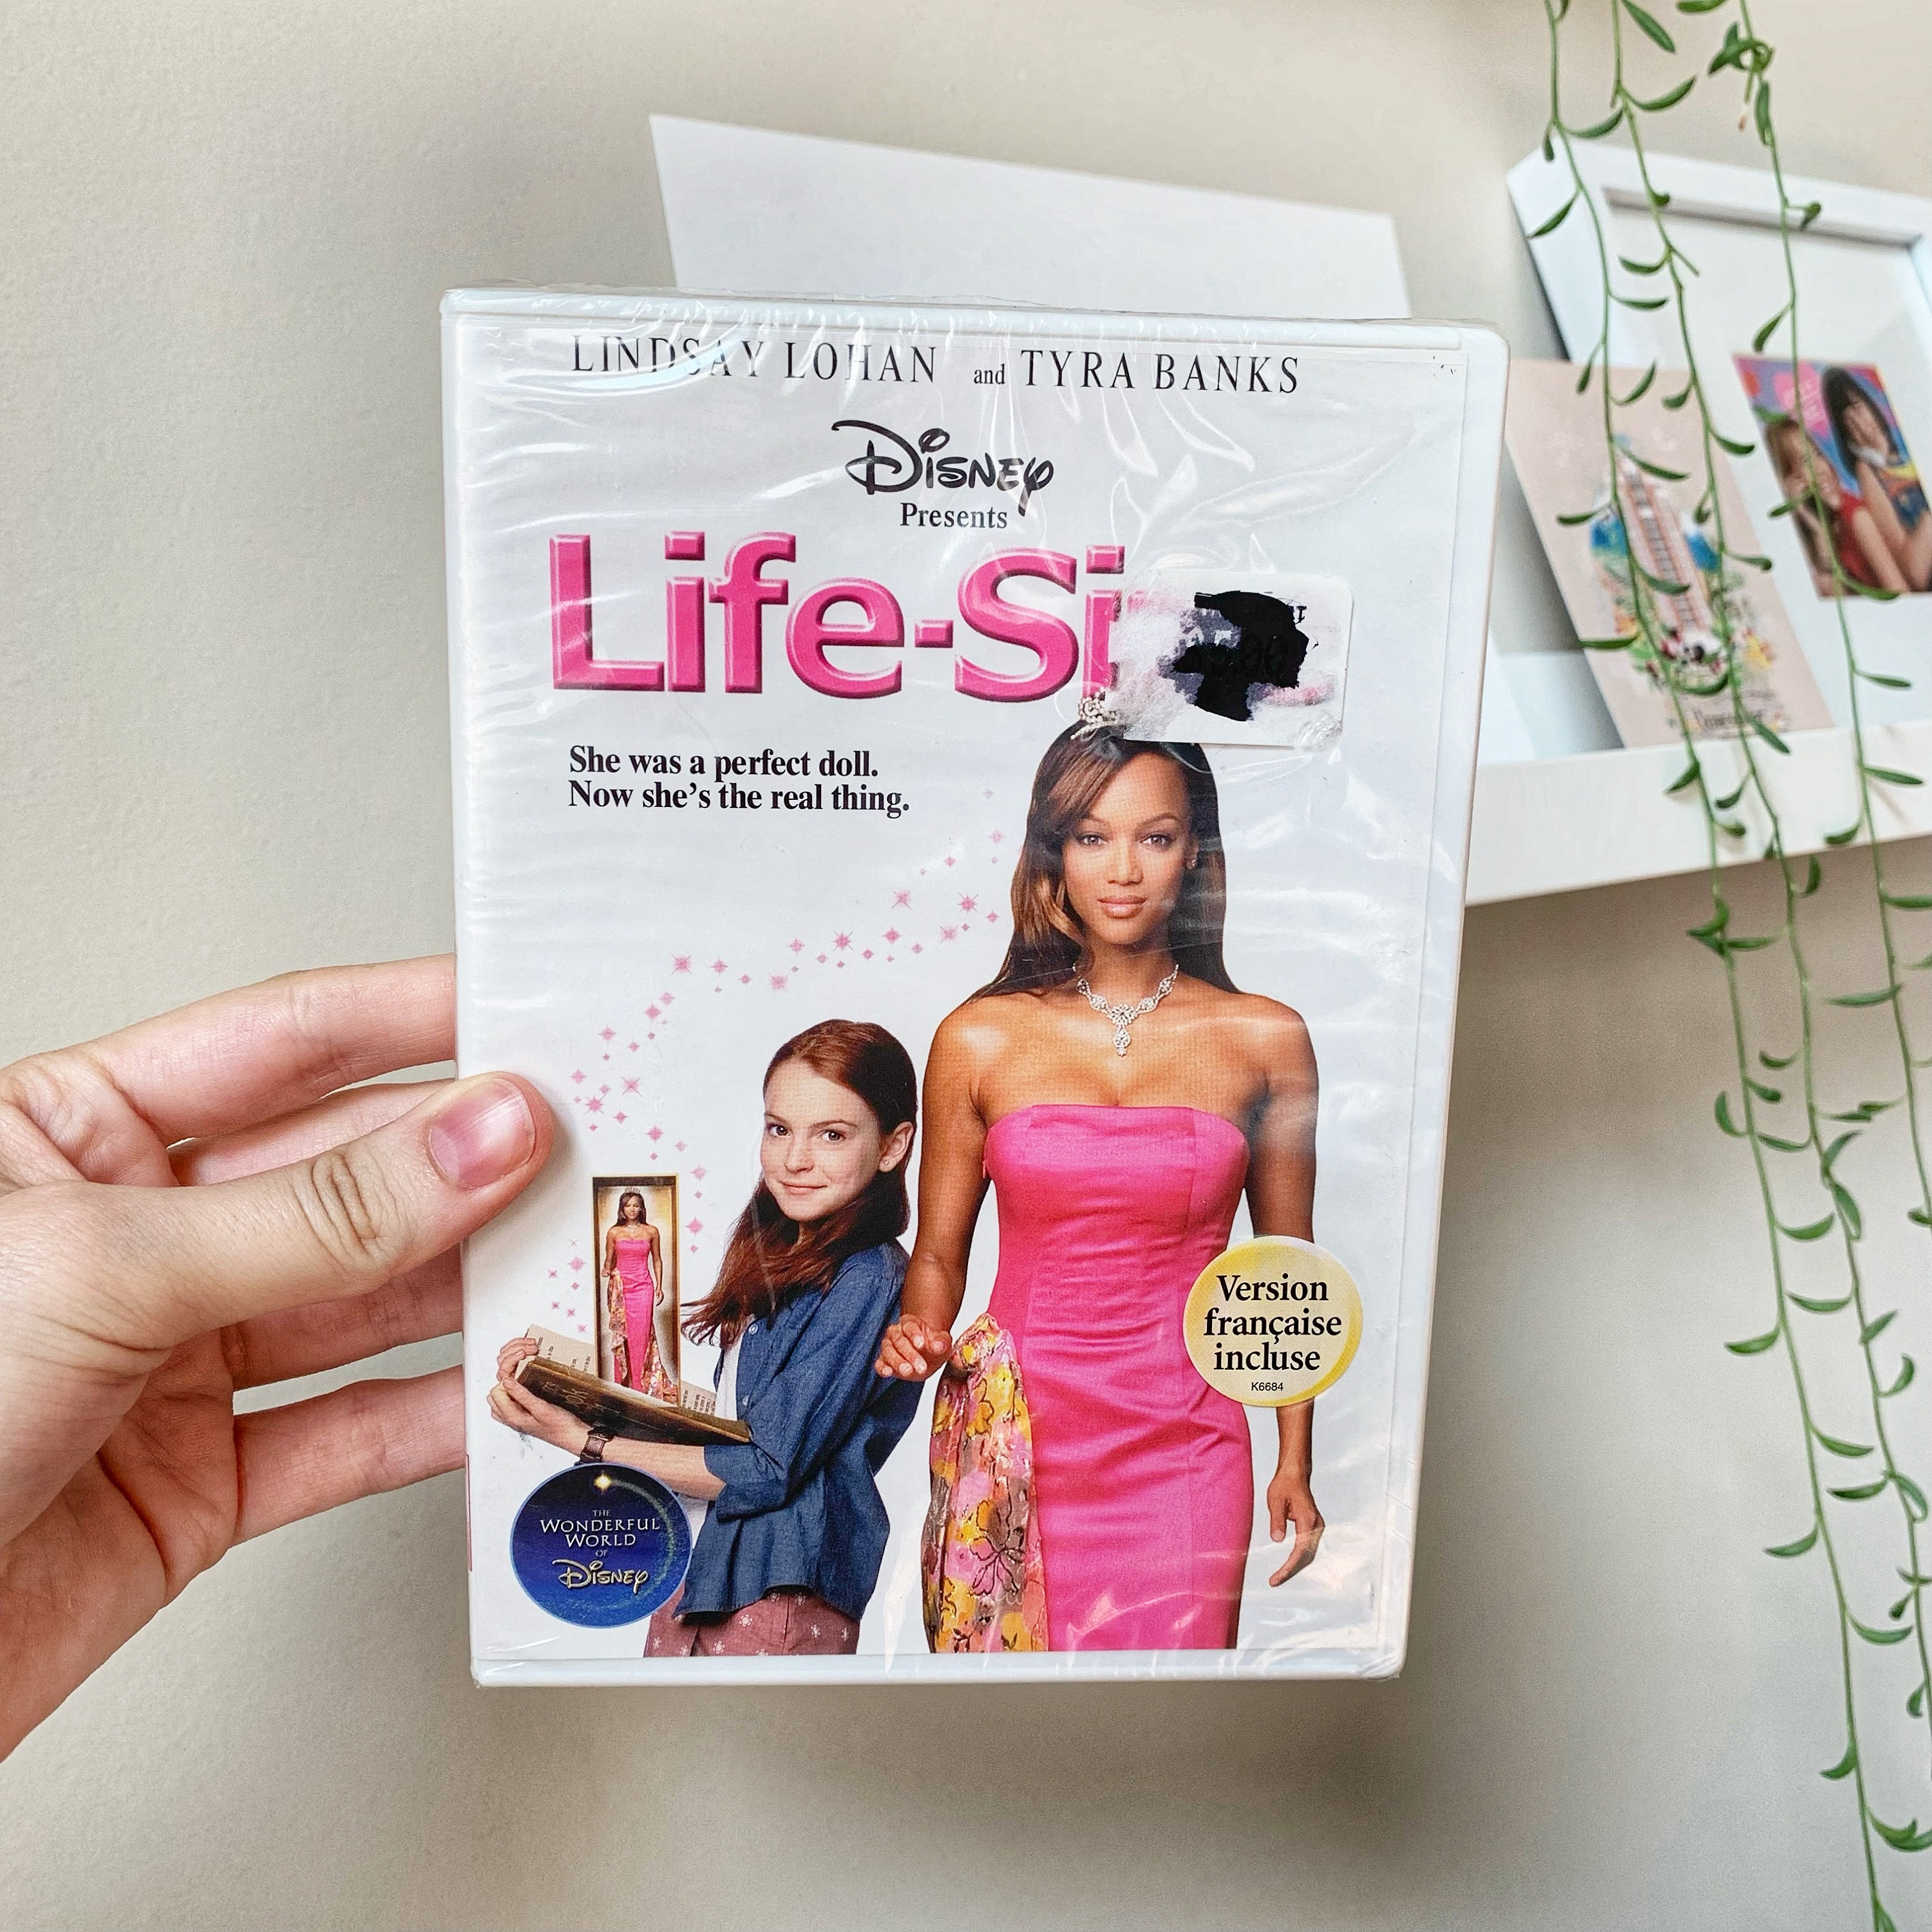 Life-Size (DVD), 57% OFF